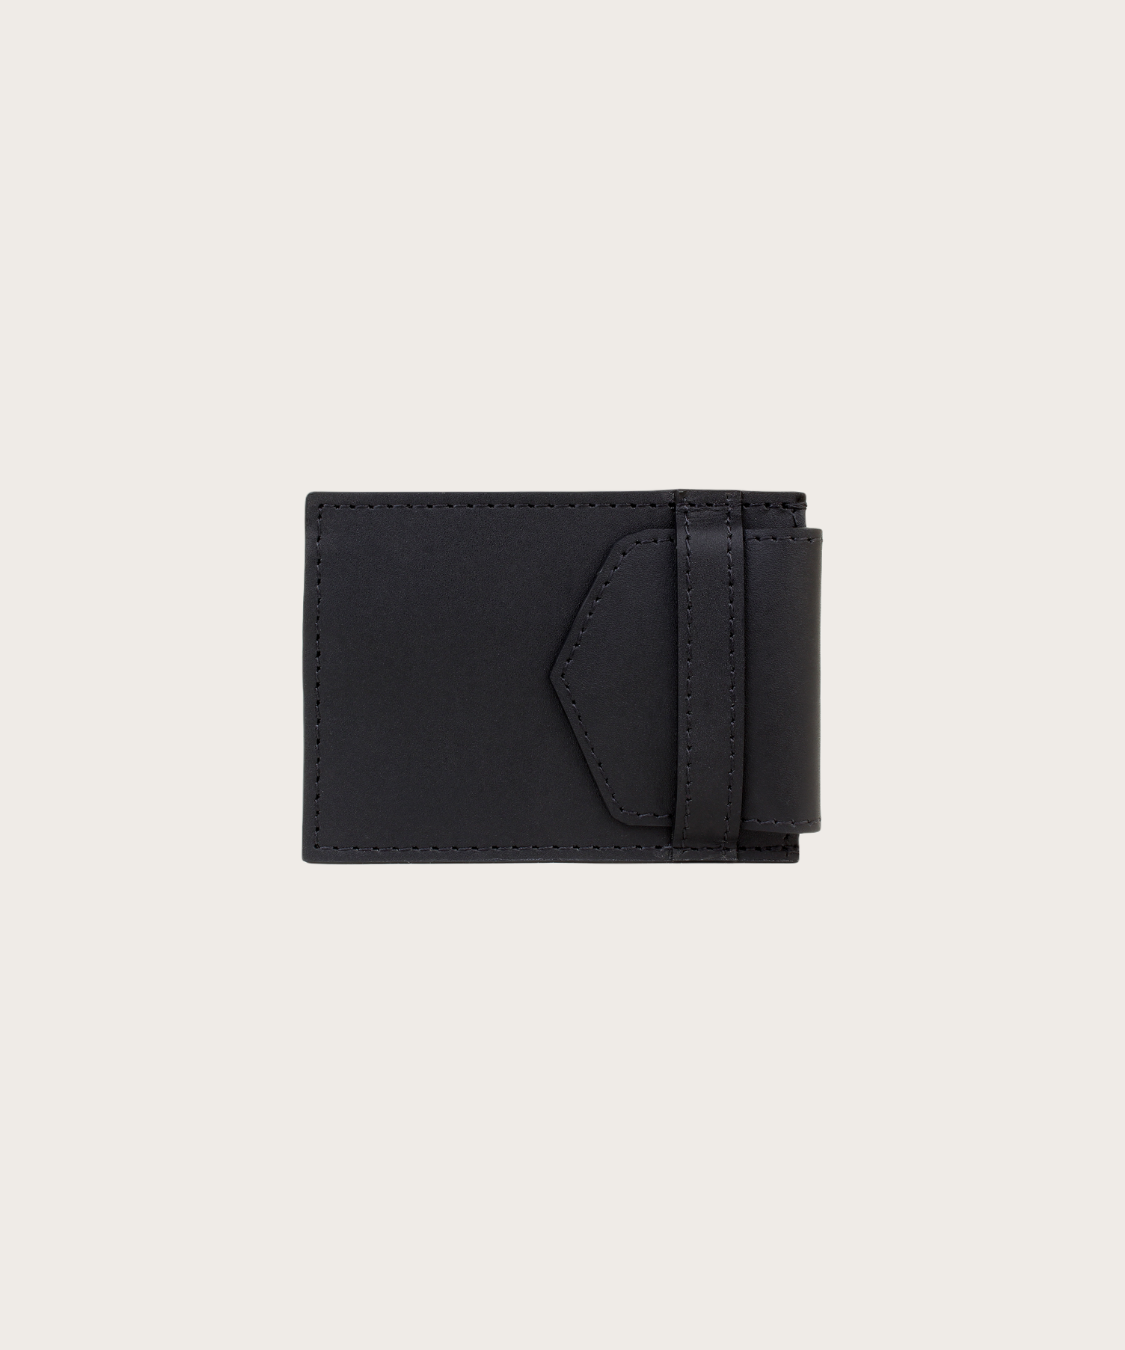 TALIA CARD CASE, a product by Kelby Huston